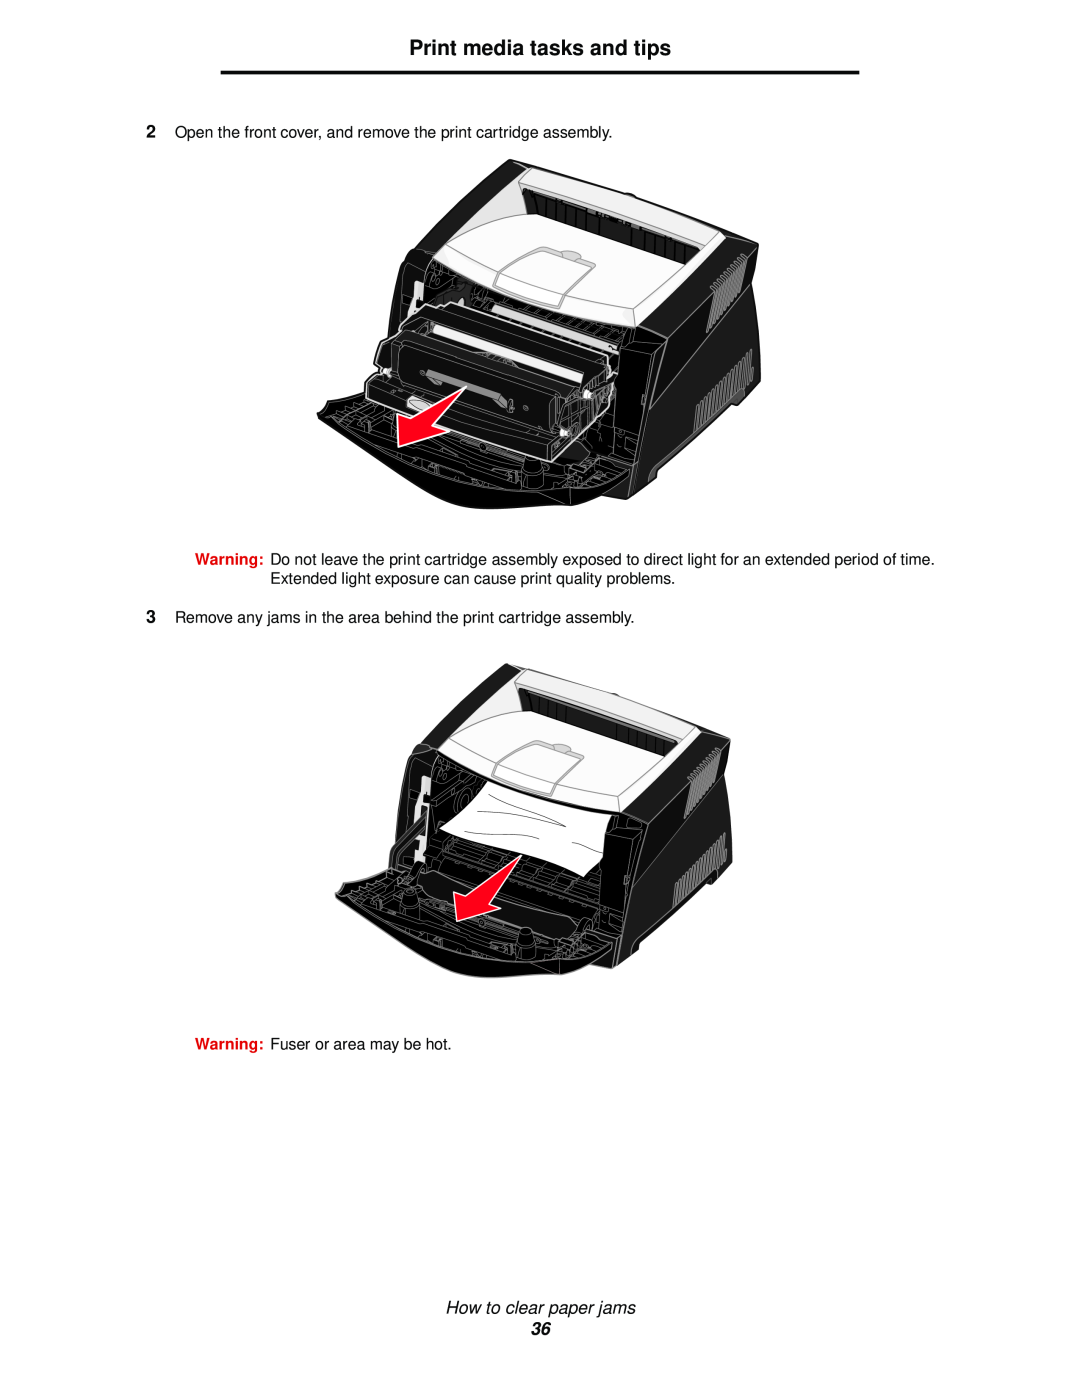 Lexmark 342n, 340 manual Print media tasks and tips, How to clear paper jams, Warning Fuser or area may be hot 